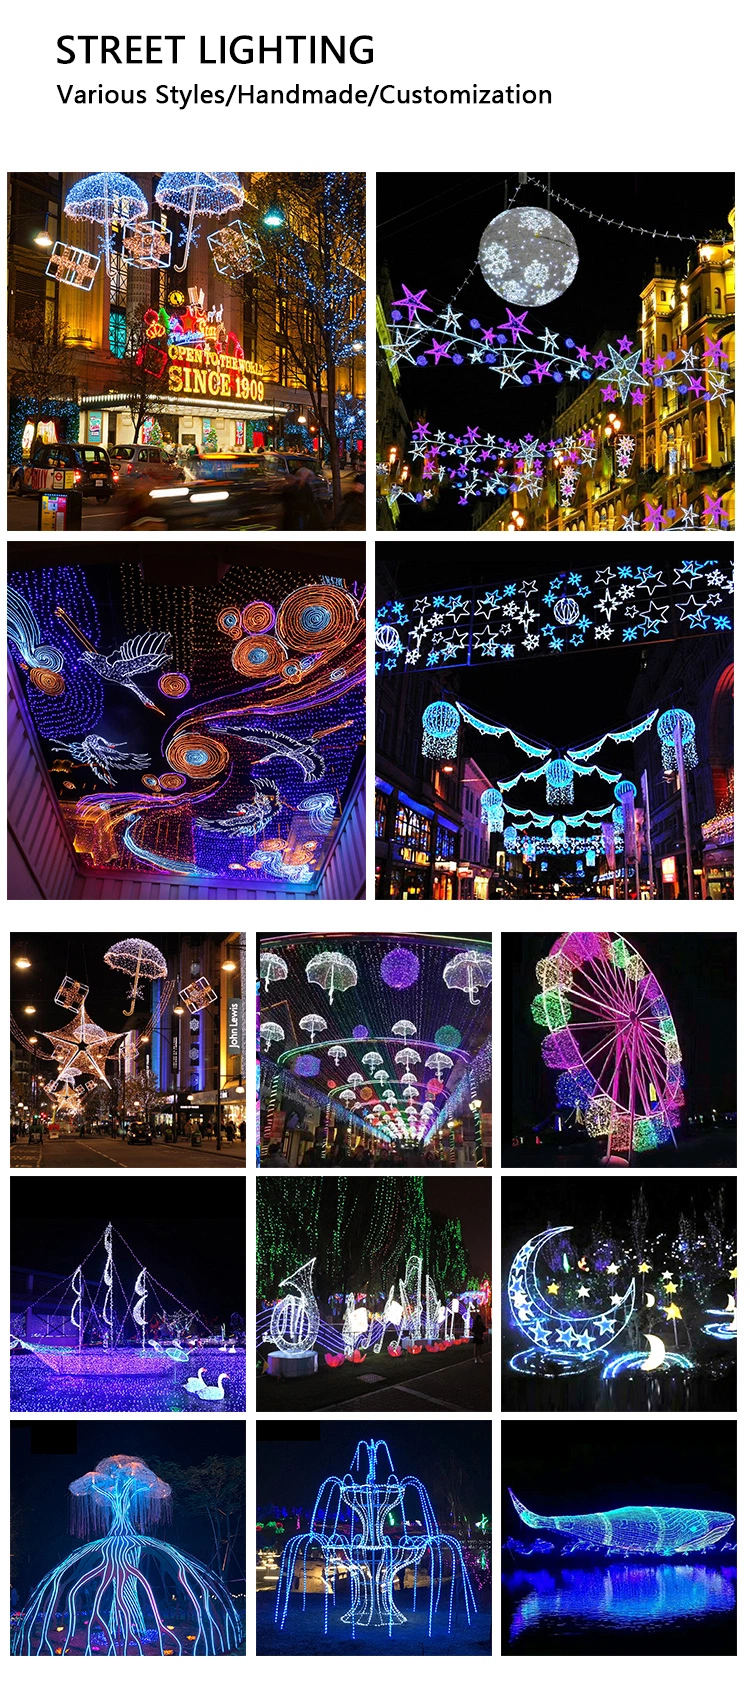 Commercial Outdoor Furniture Moon LED Illuminated Hanging Swing Decoration Motif Light Home Garden Park Mall Landscaping